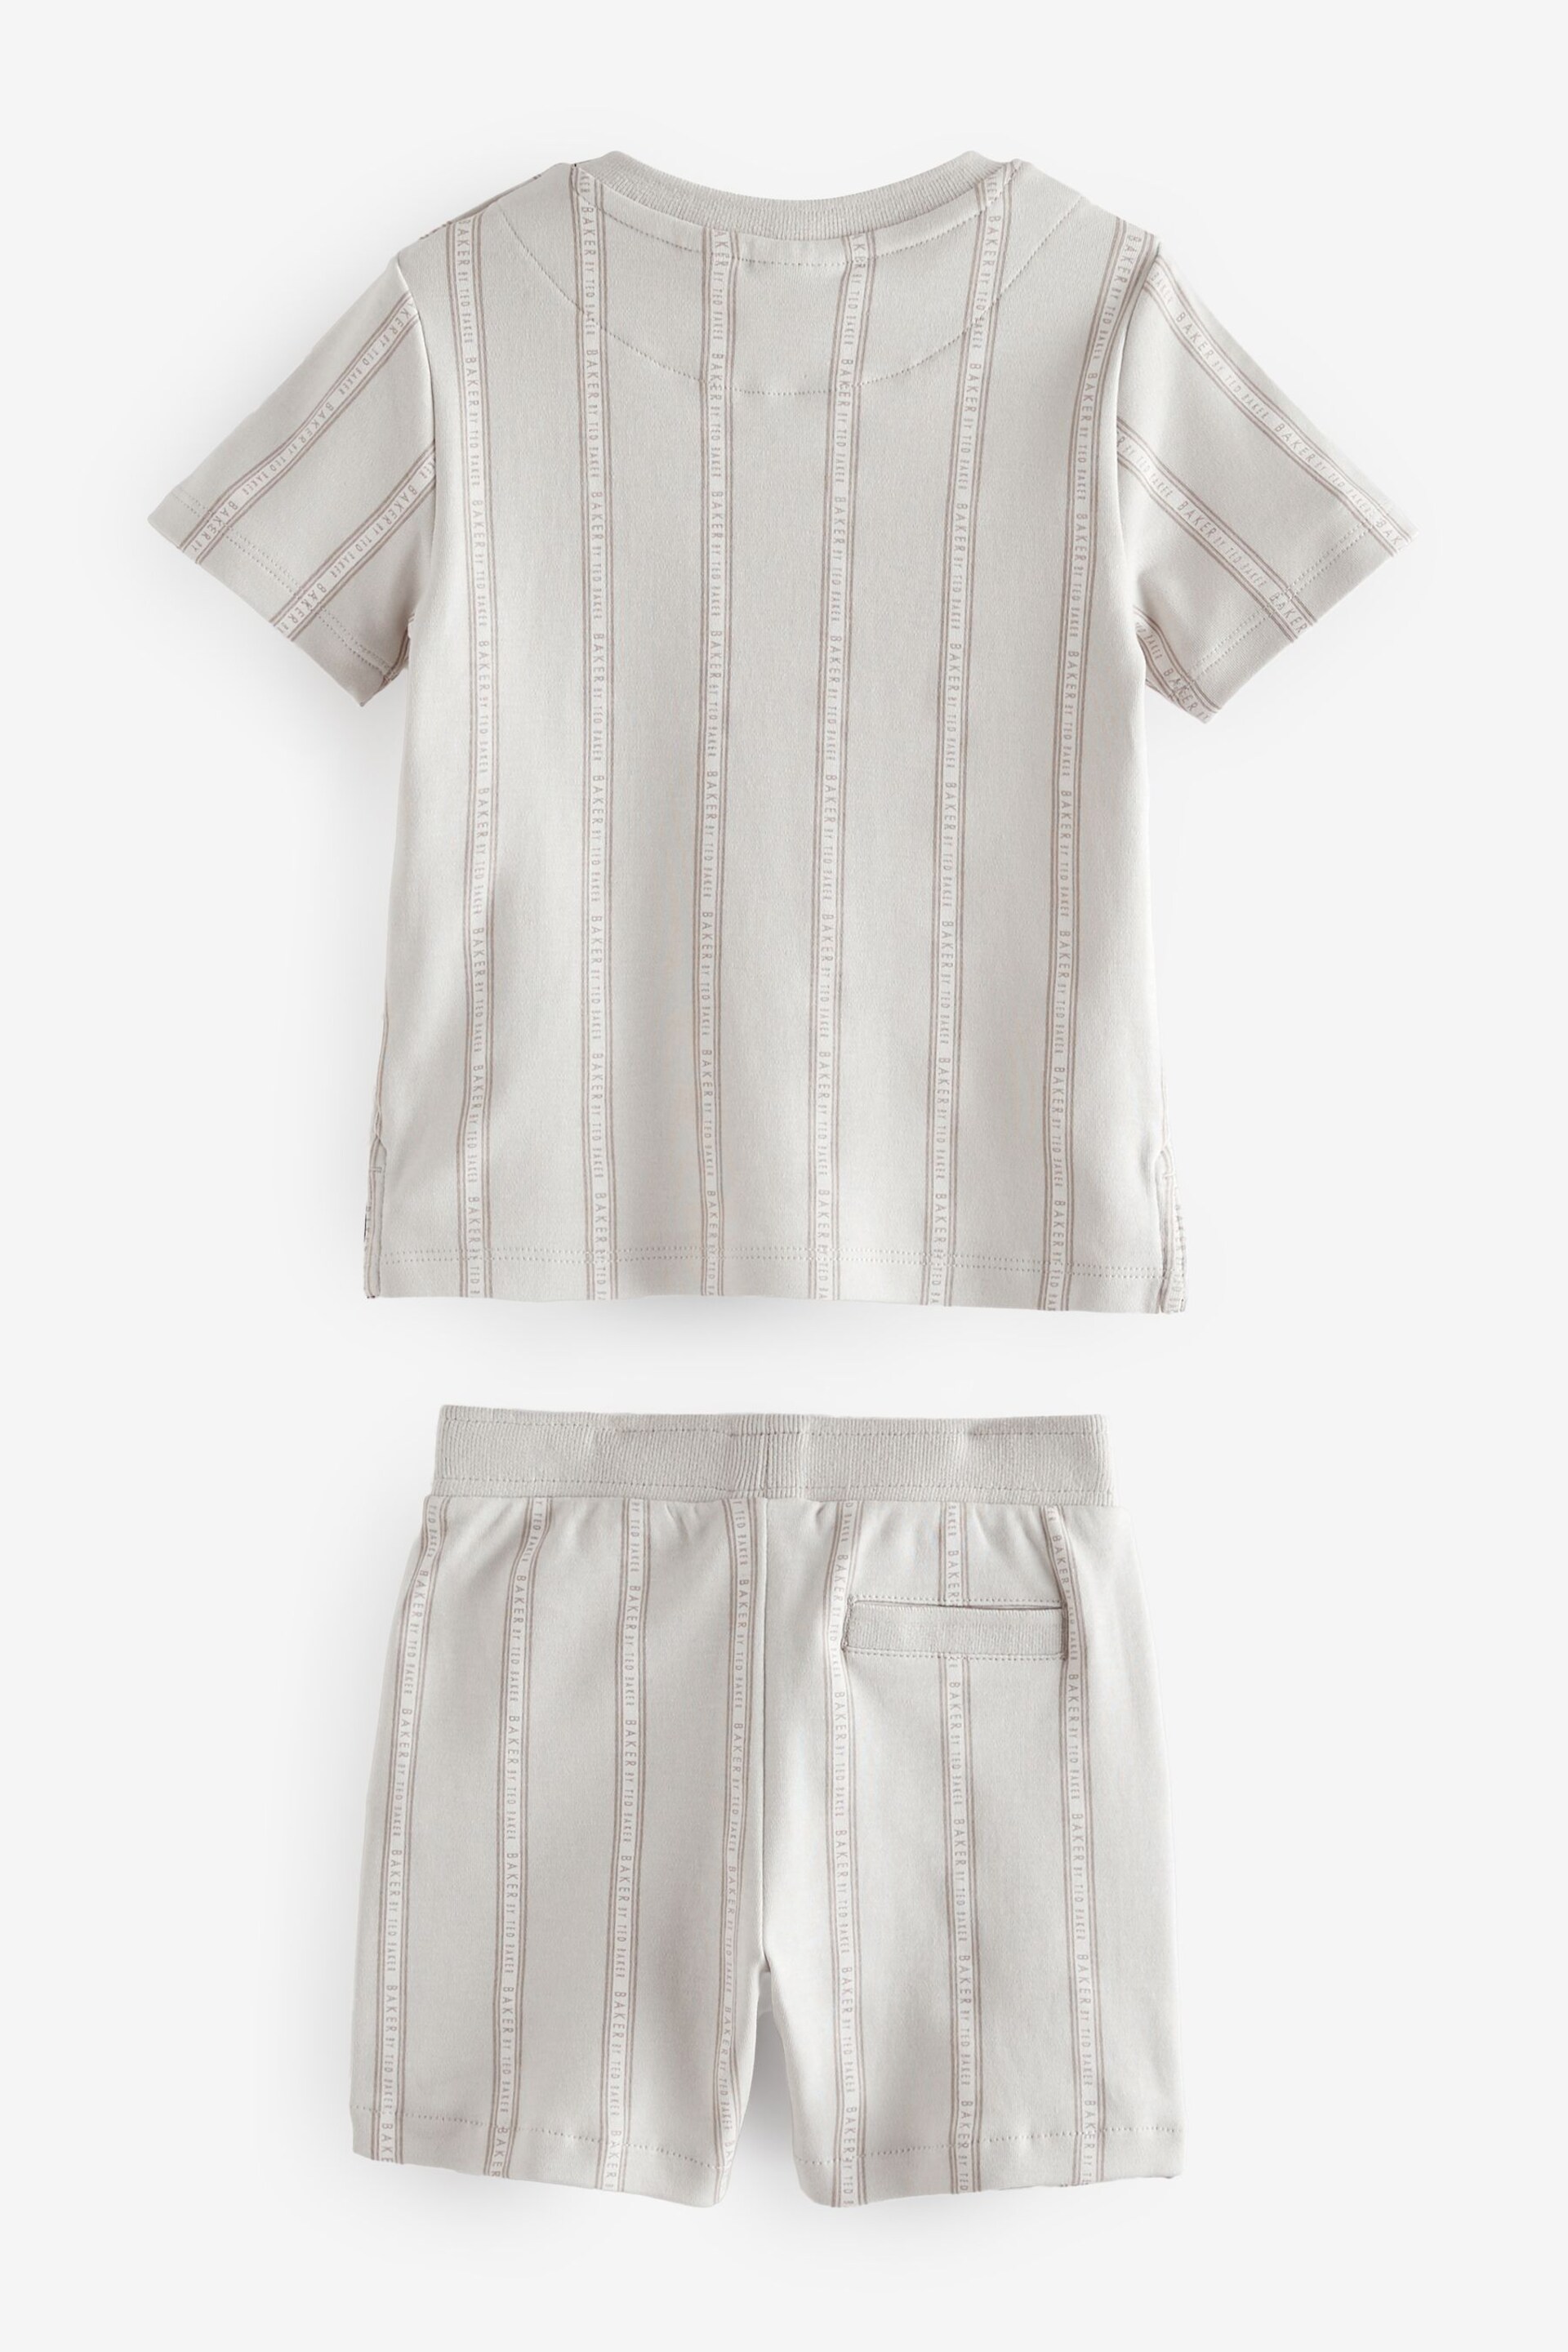 Baker by Ted Baker Striped T-Shirt and Shorts Set - Image 7 of 9